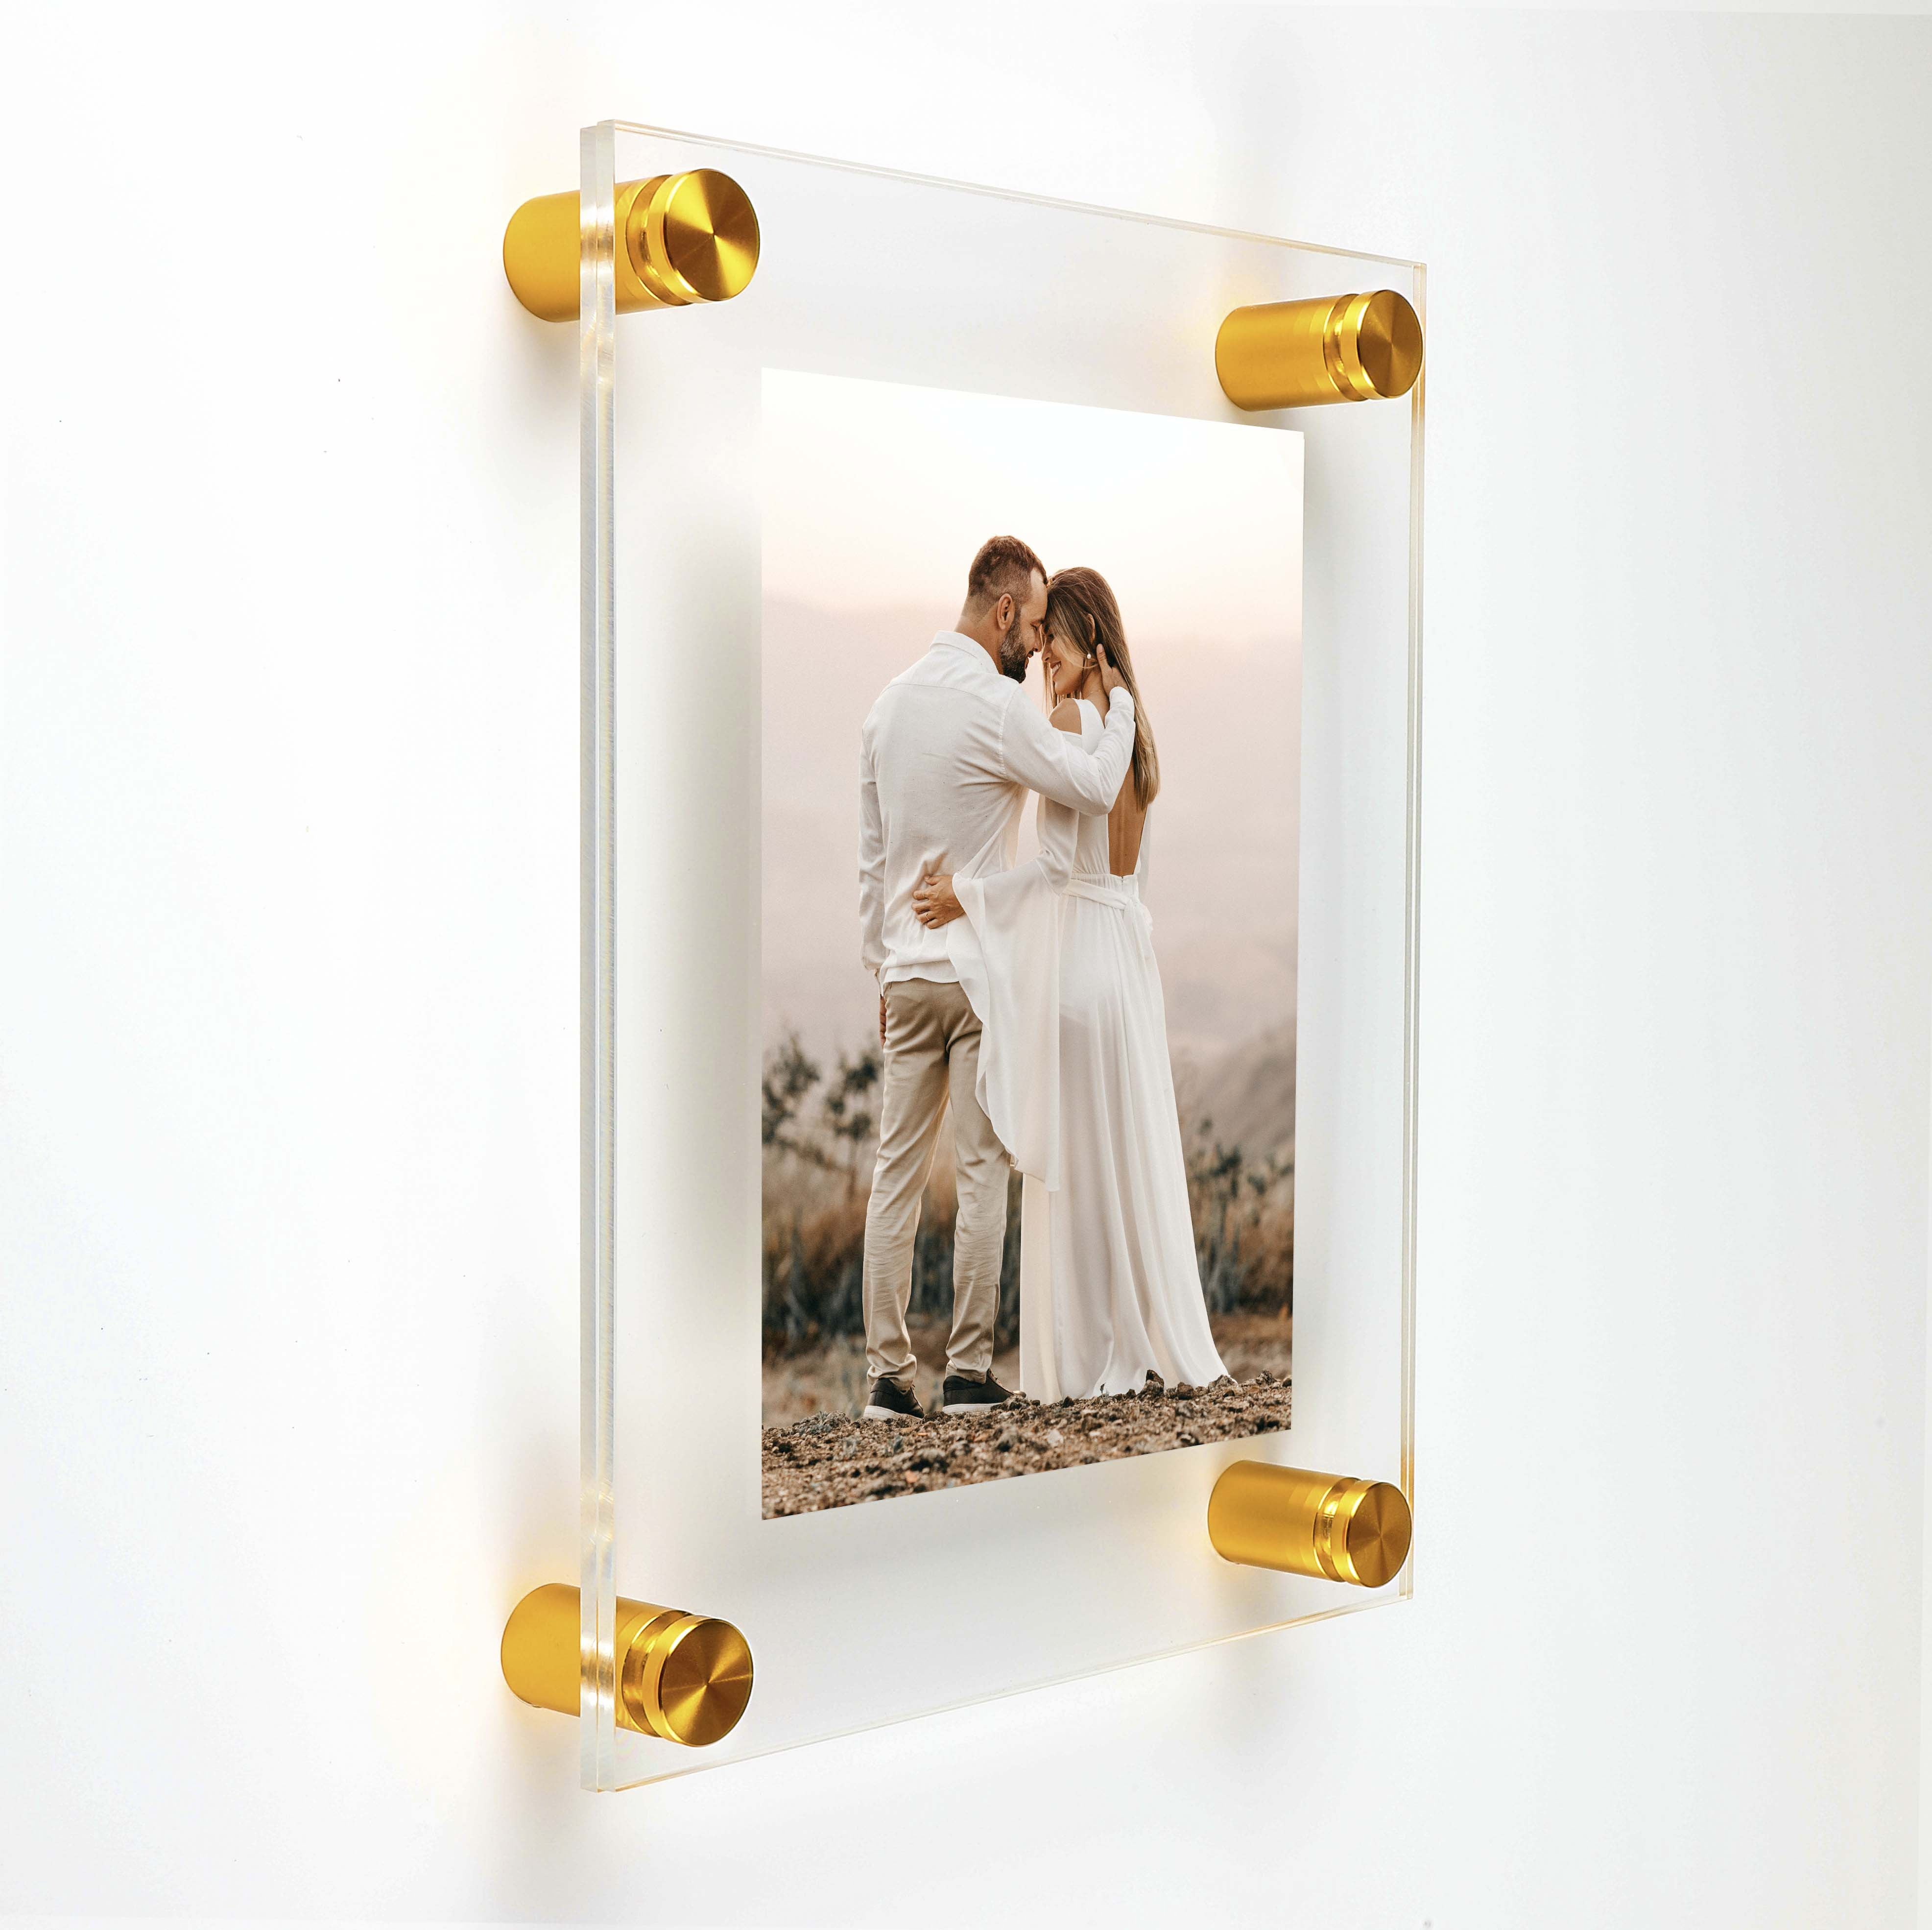 (2) 7-1/2'' x 9-1/2'' Clear Acrylics , Pre-Drilled With Polished Edges (Thick 1/8'' each), Wall Frame with (4) 5/8'' x 3/4'' Gold Anodized Aluminum Standoffs includes Screws and Anchors